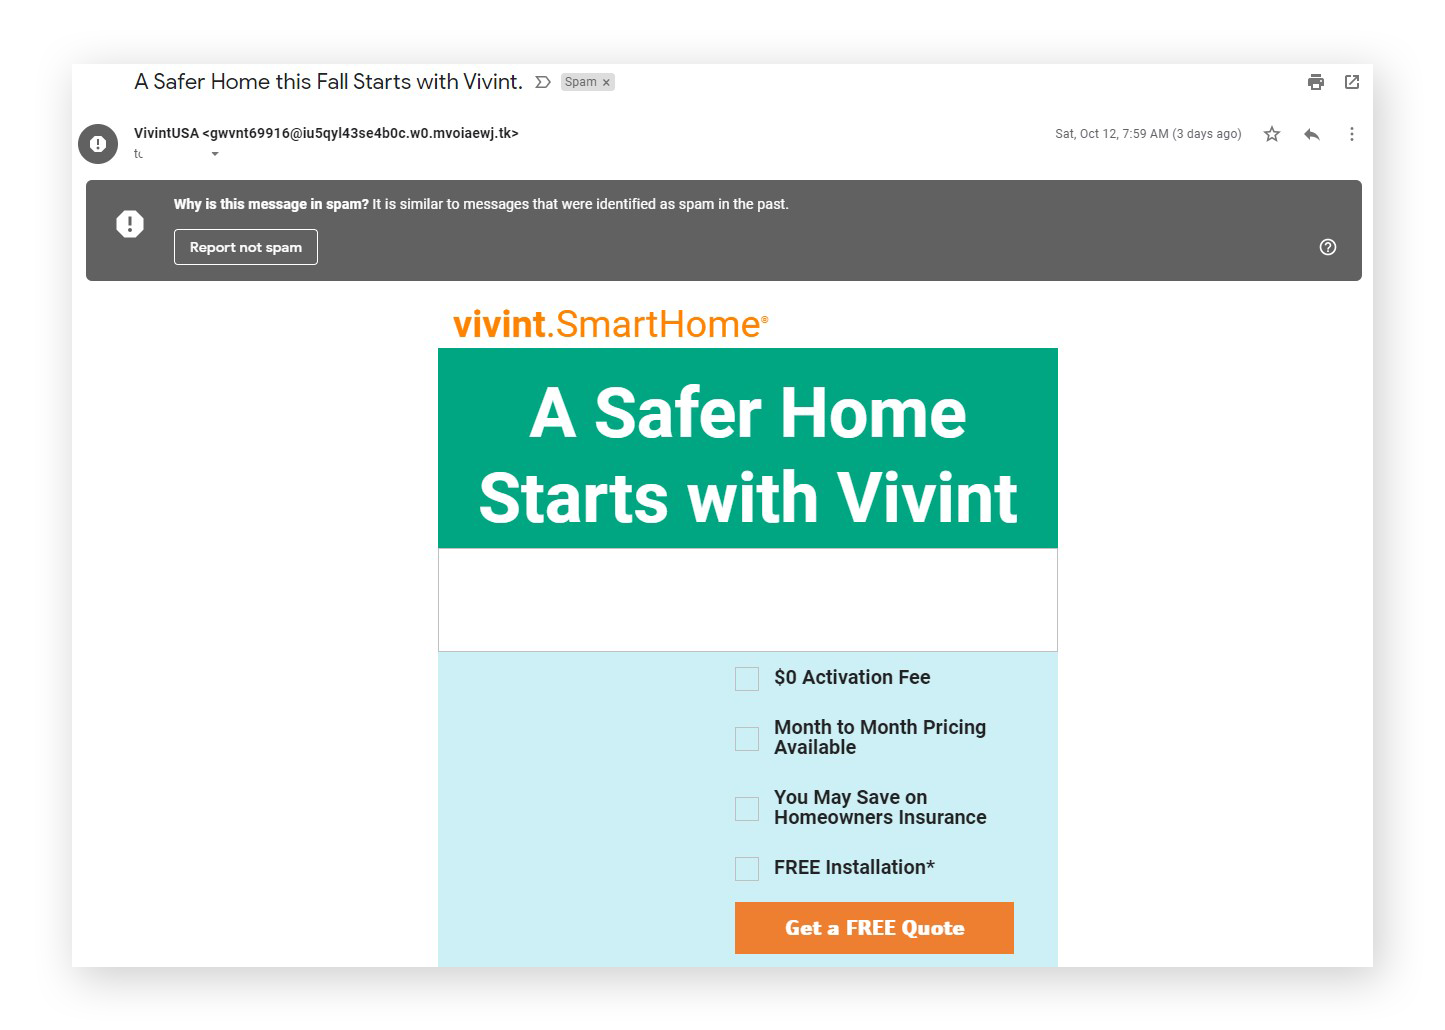 Example of a spam email promoting a smart home security solution